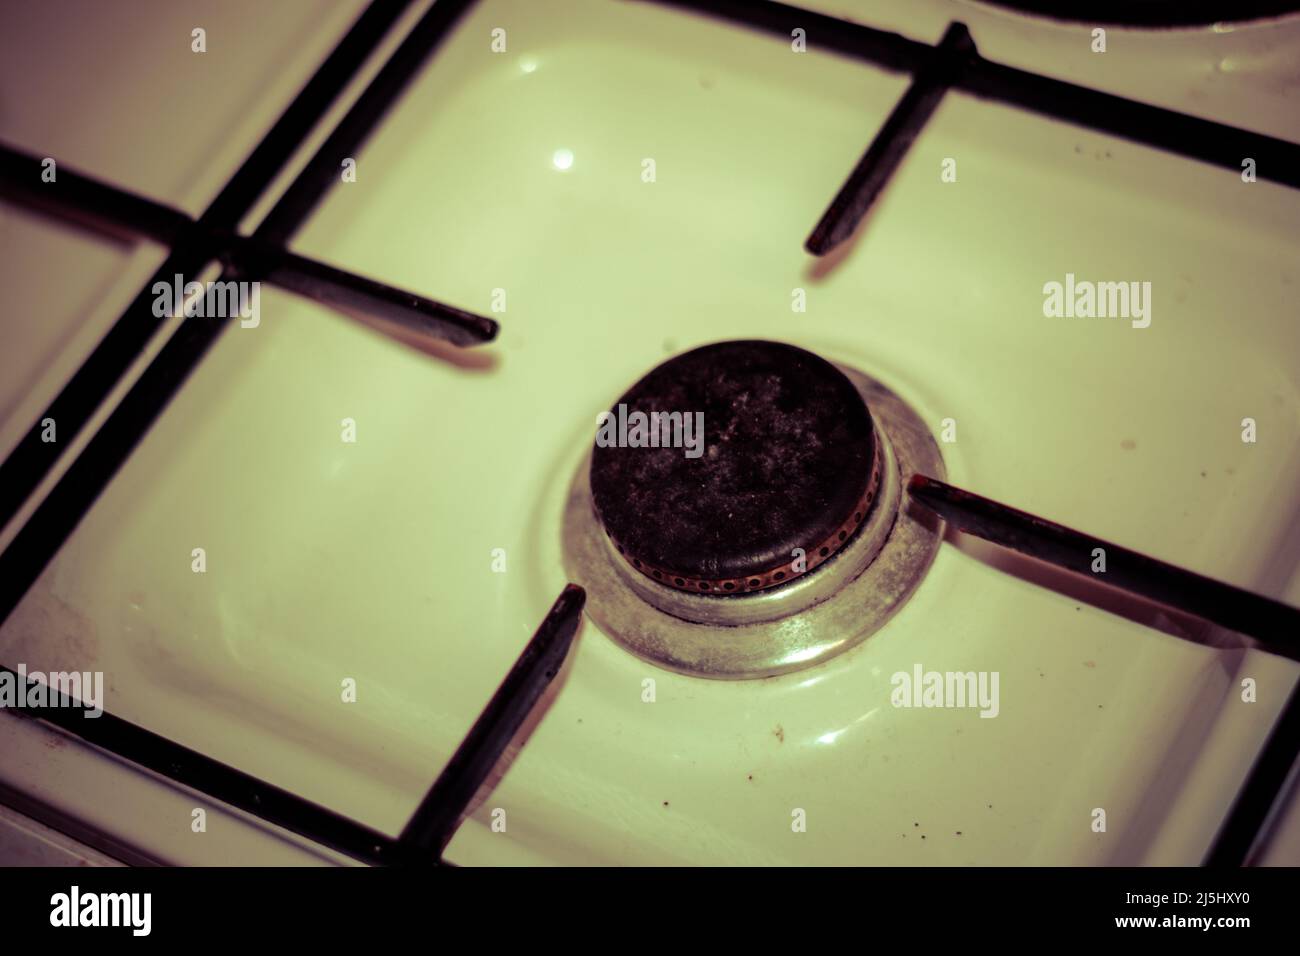 Gas cooker without pans or food, hard times without any food to prepare. Old kitchen. Stock Photo